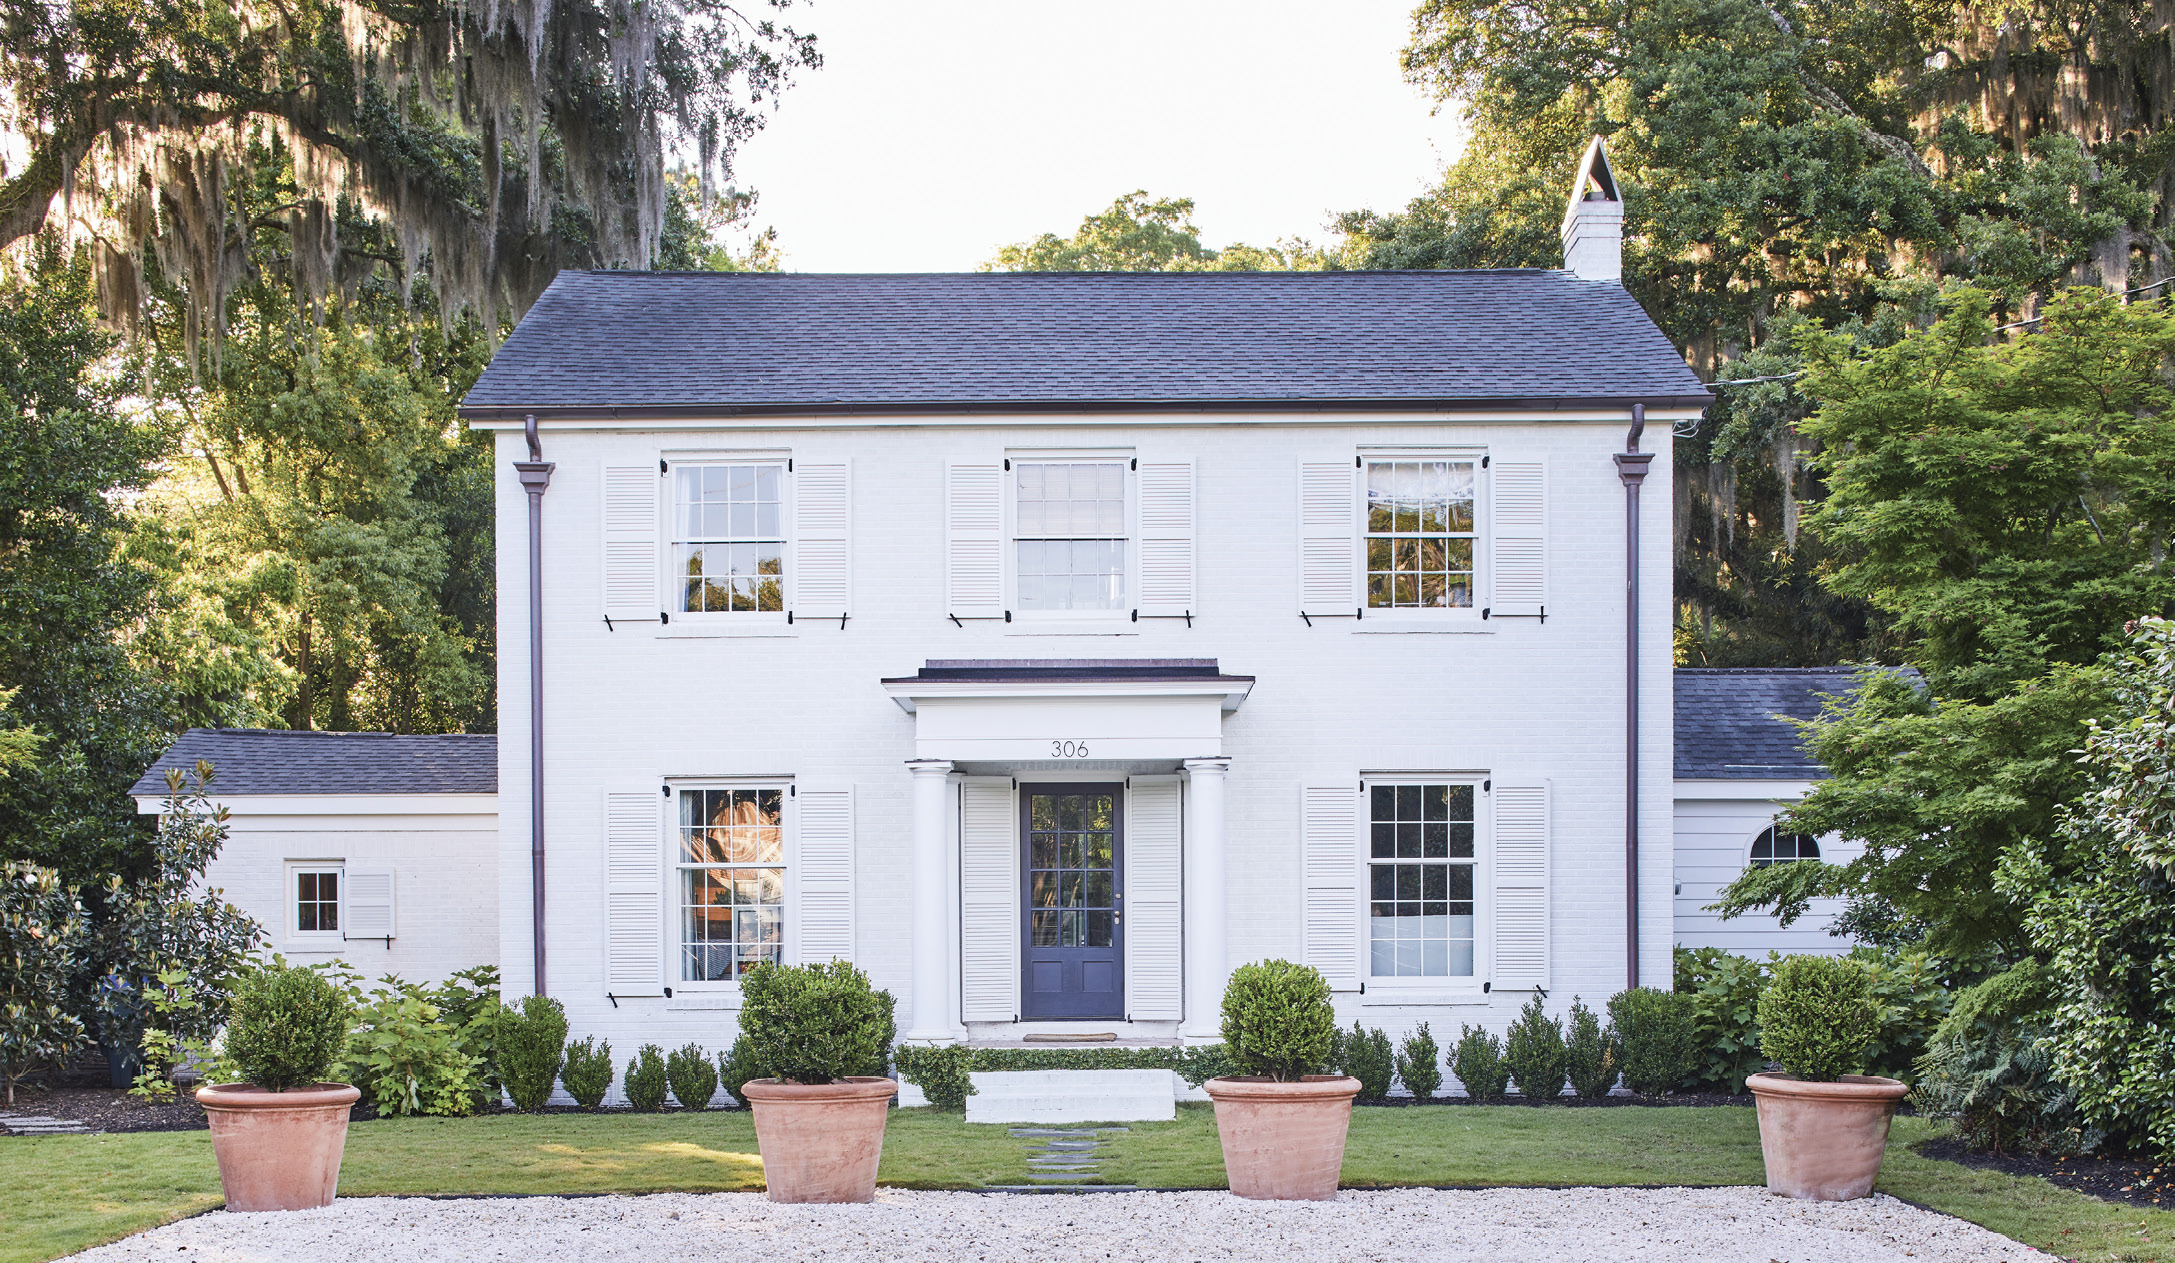 WARM WELCOME: Working with Birmingham-based architect Jimmy Laughlin,  James Hewlette and Jordan Kruse upped the Georgian charm of their circa-1950 Riverland Terrace home. “Scaling the windows a little larger made a huge difference for the proportions of the house,” says their interior designer, and friend, Elly Poston Cooper.